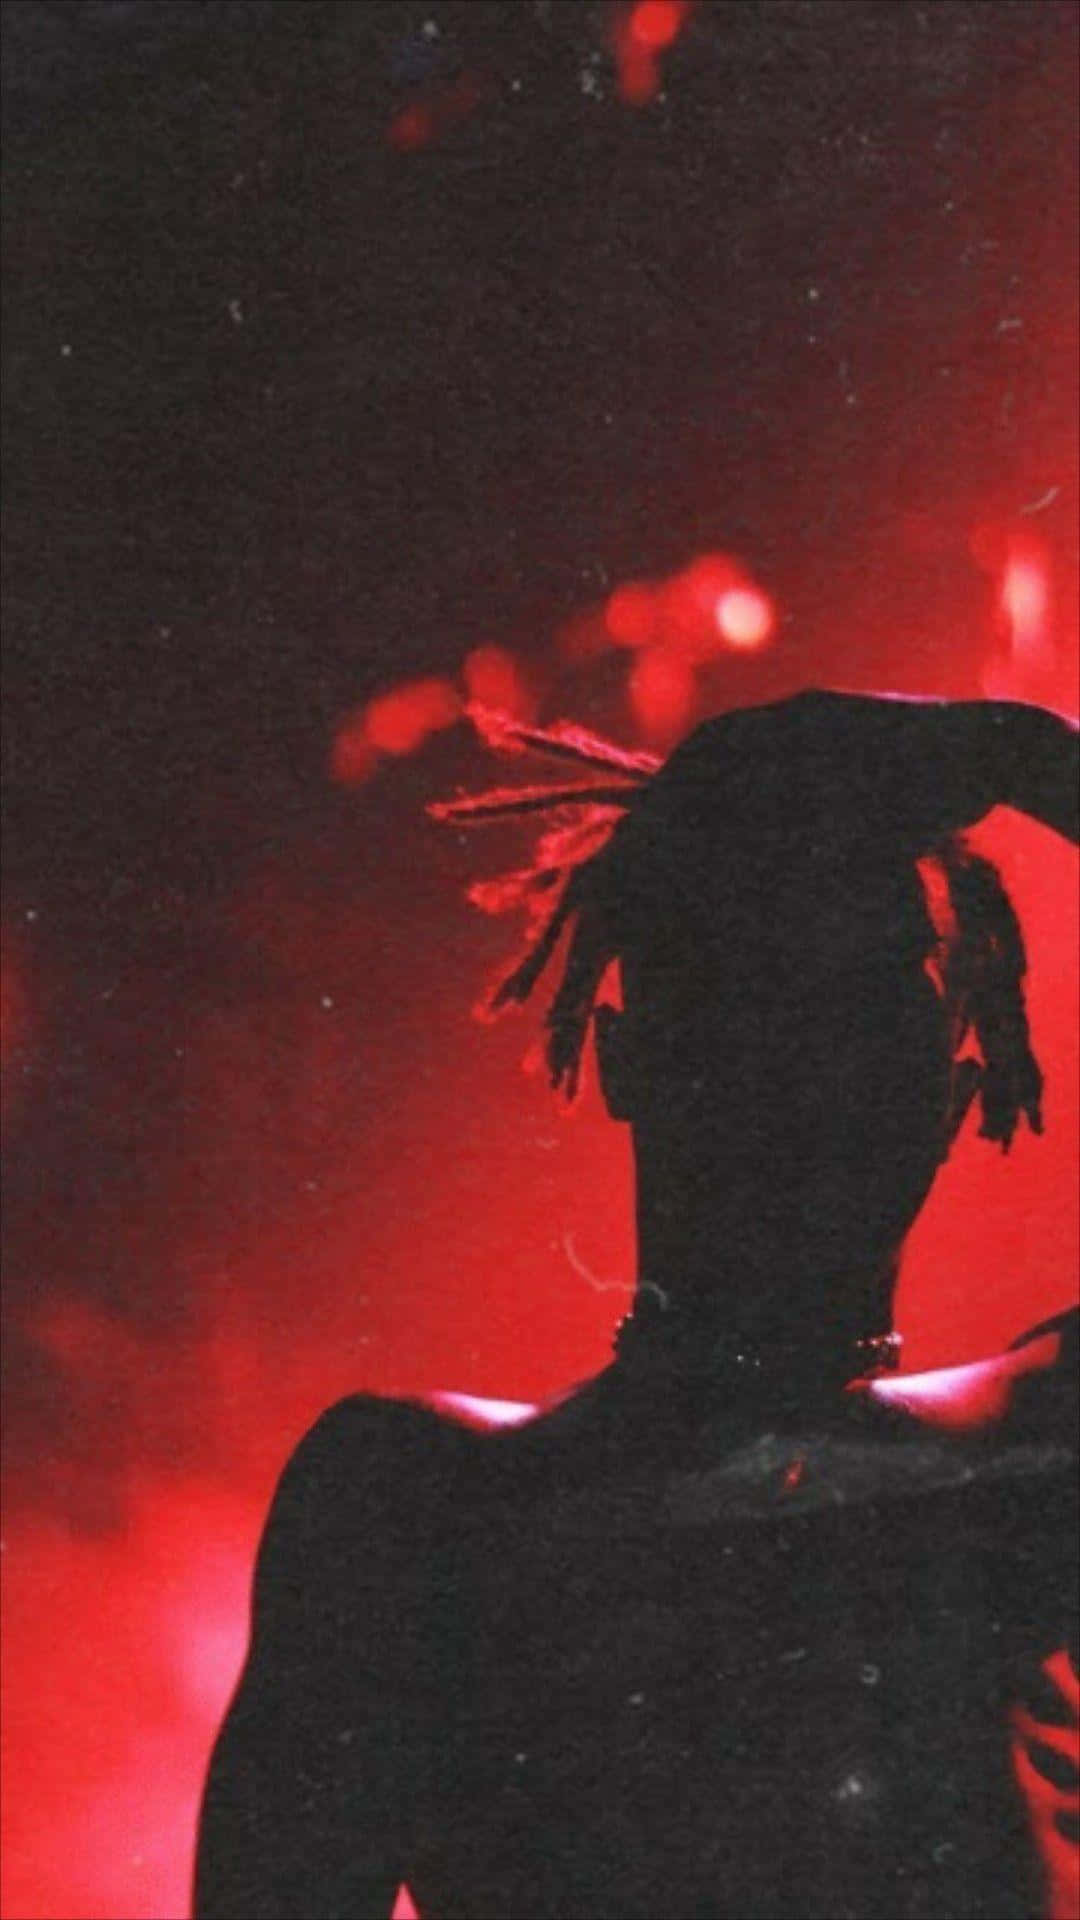 A Silhouette Of A Man With Dreadlocks In The Red Light Wallpaper